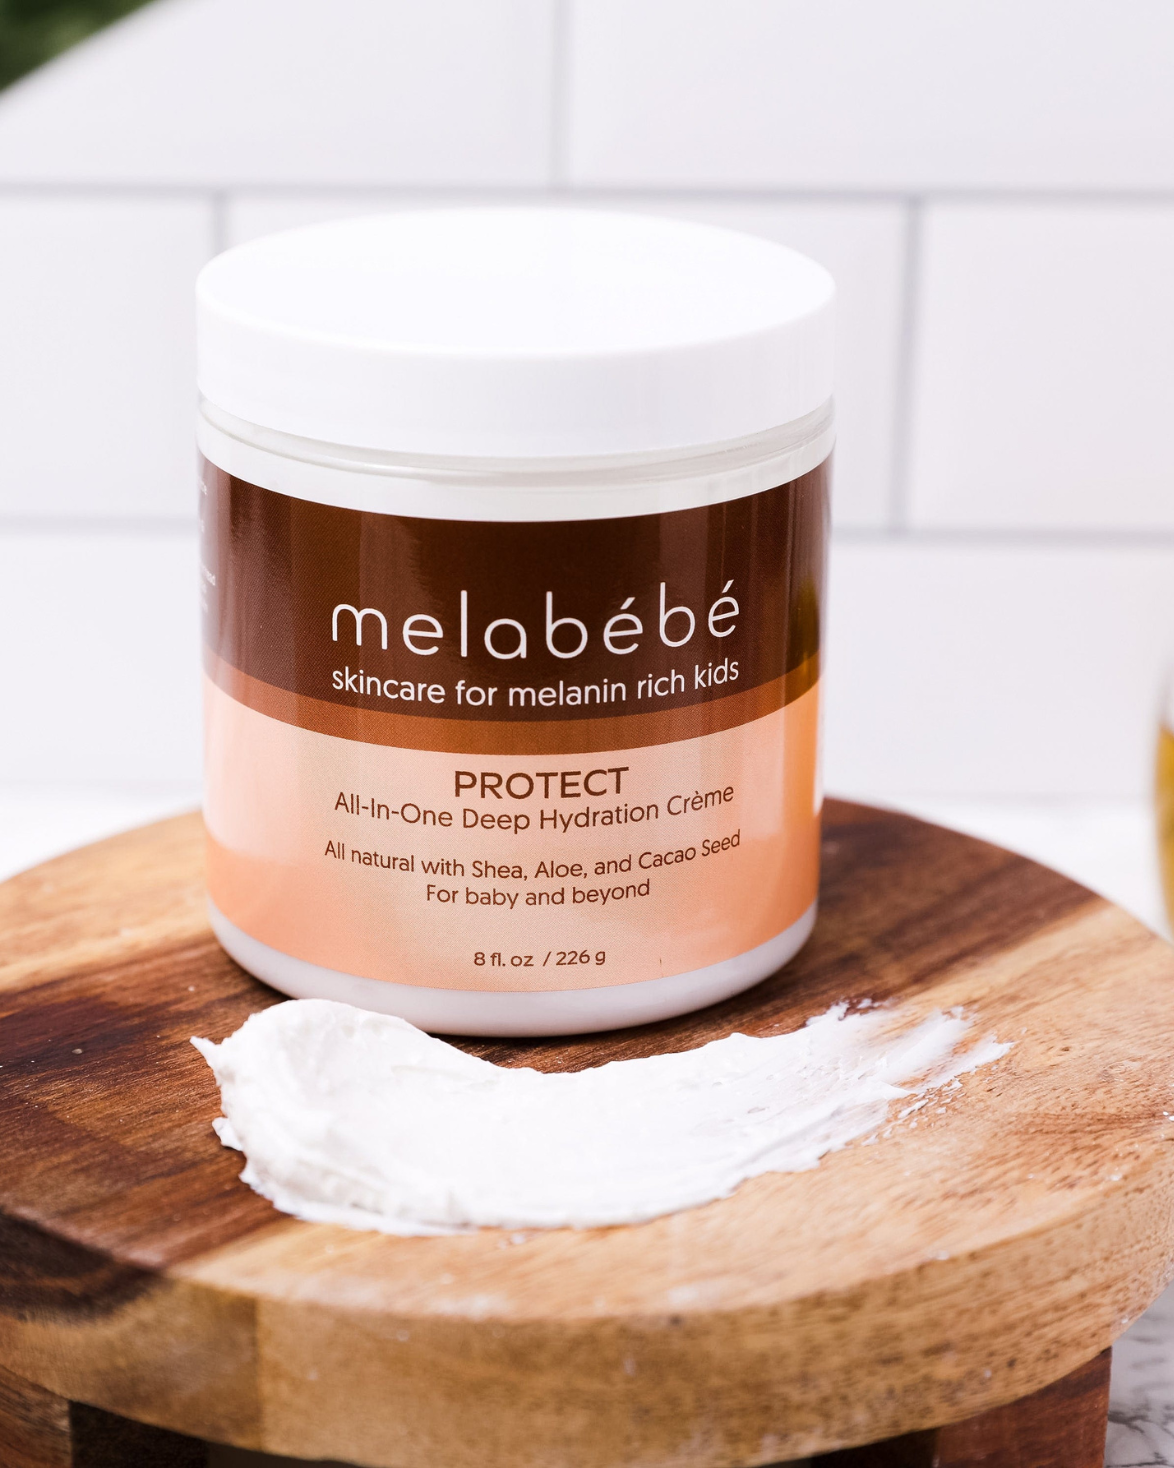 Protect: All-in-One Moisture and Hydration Crème